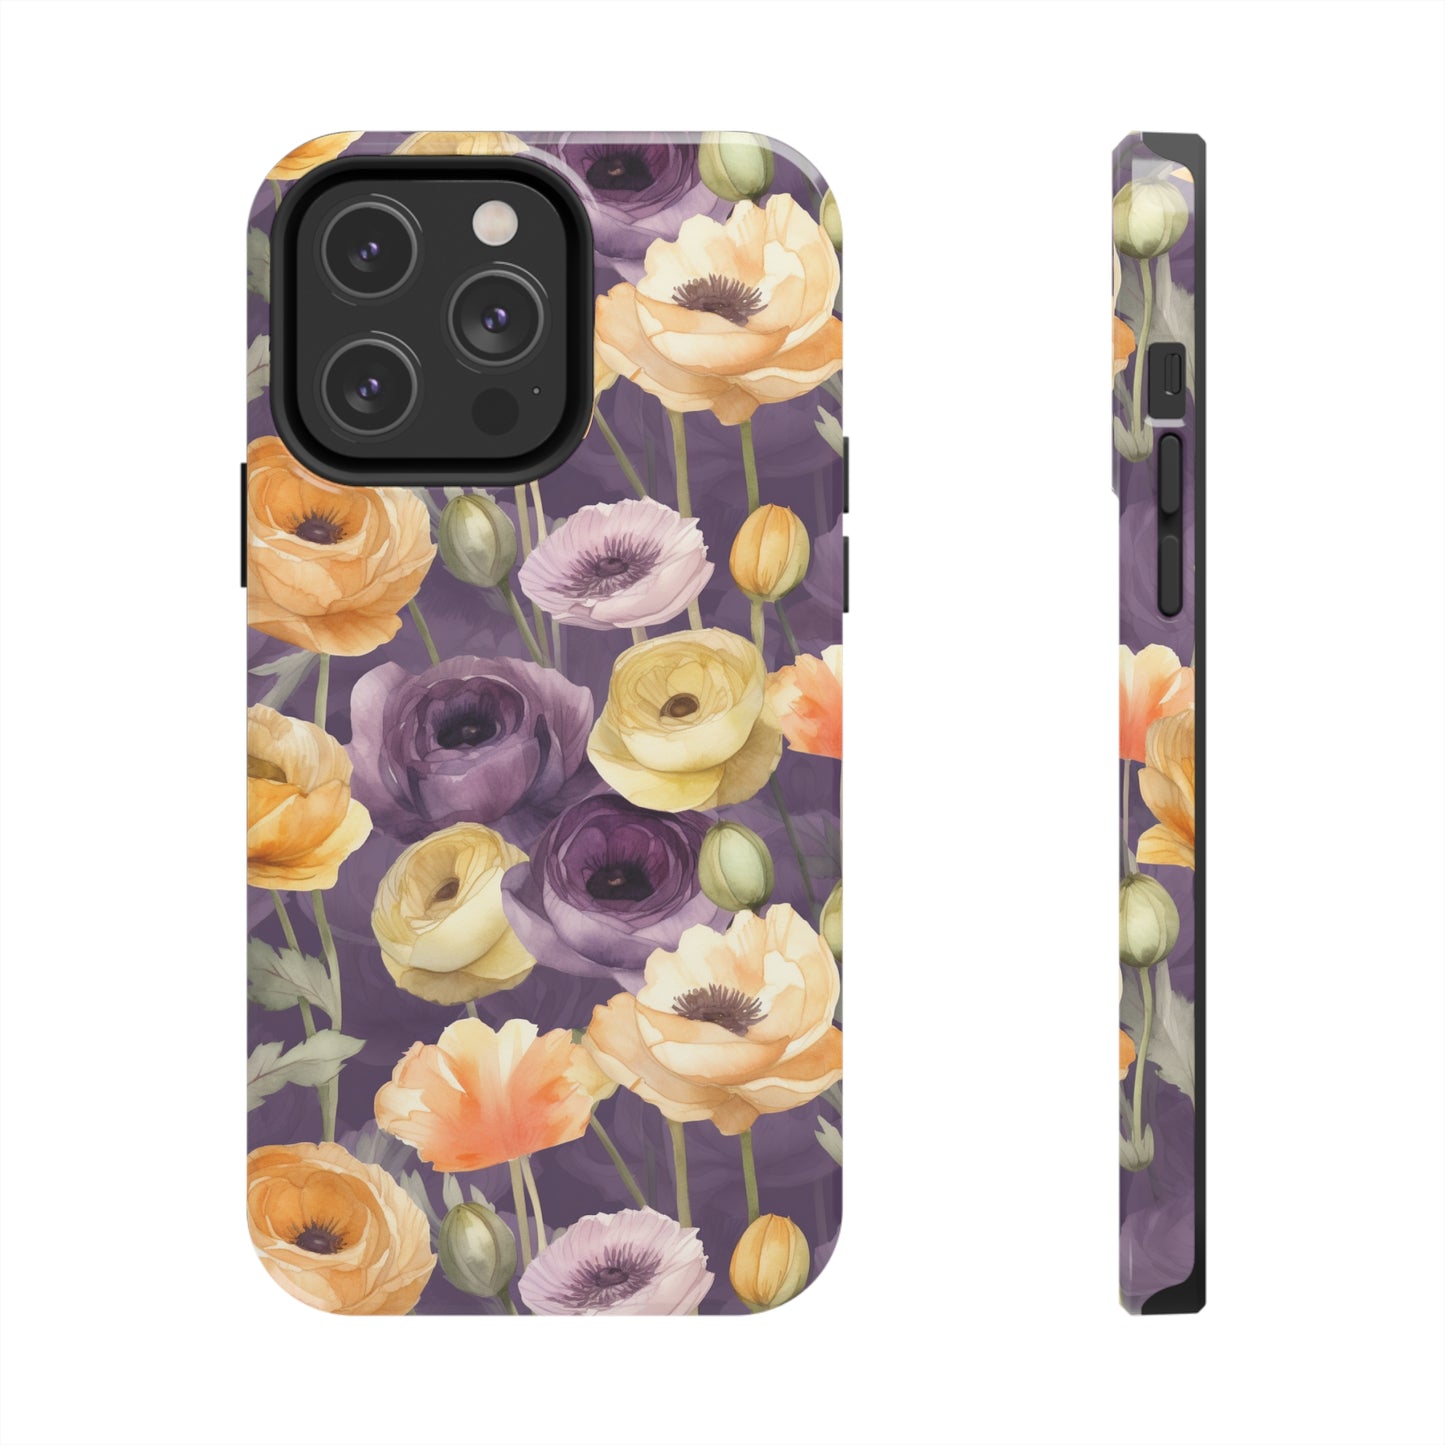 purple iphone case with purple and yellow flowers and green leaves